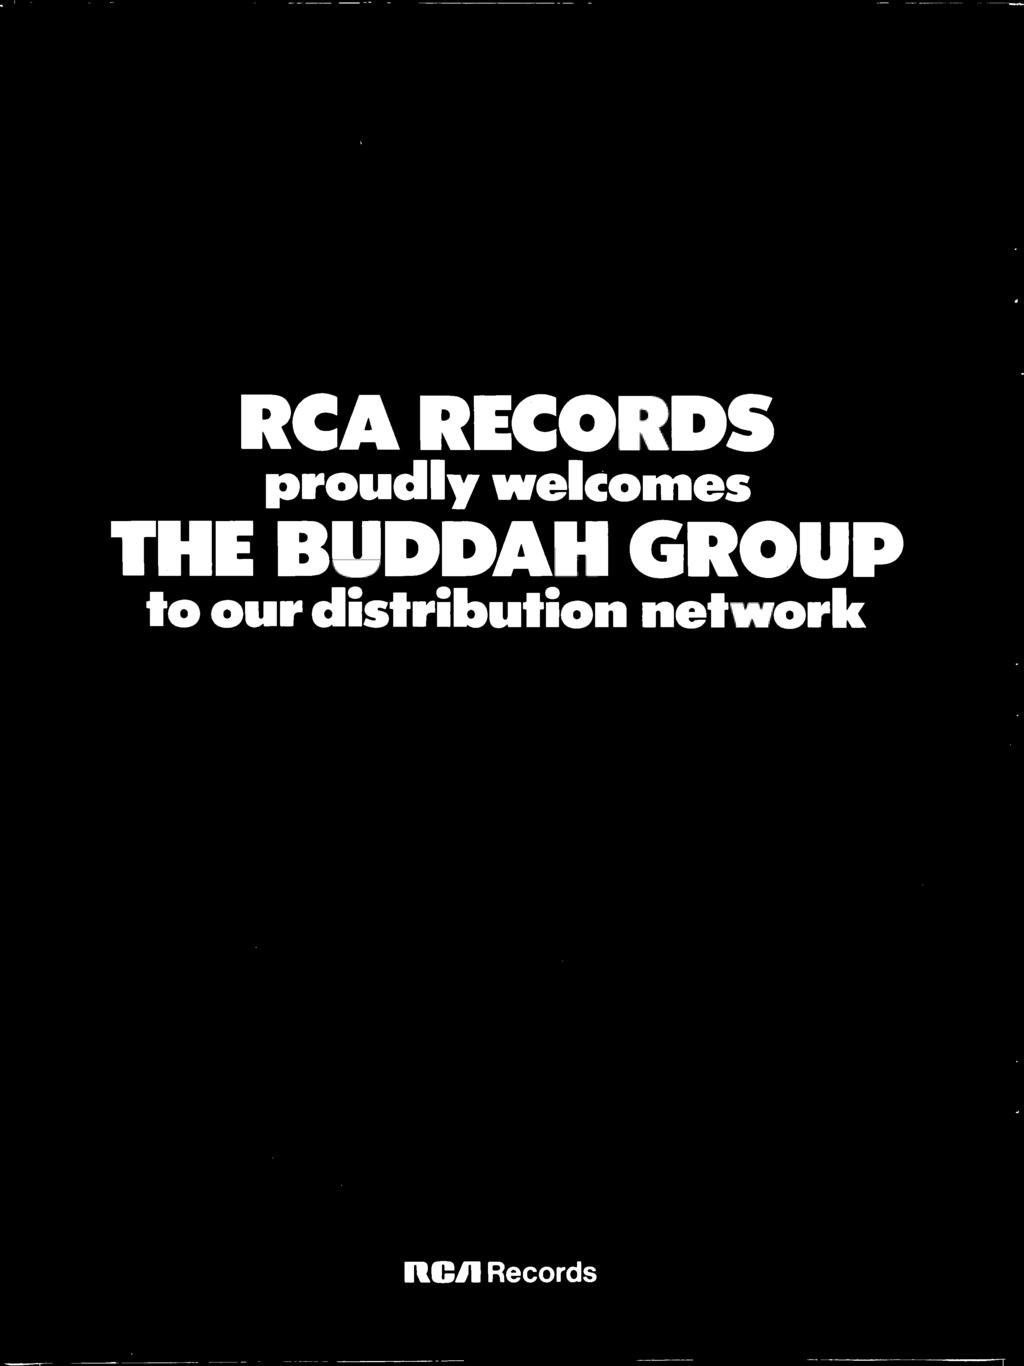 welcomes THE BUDDAH GROUP to